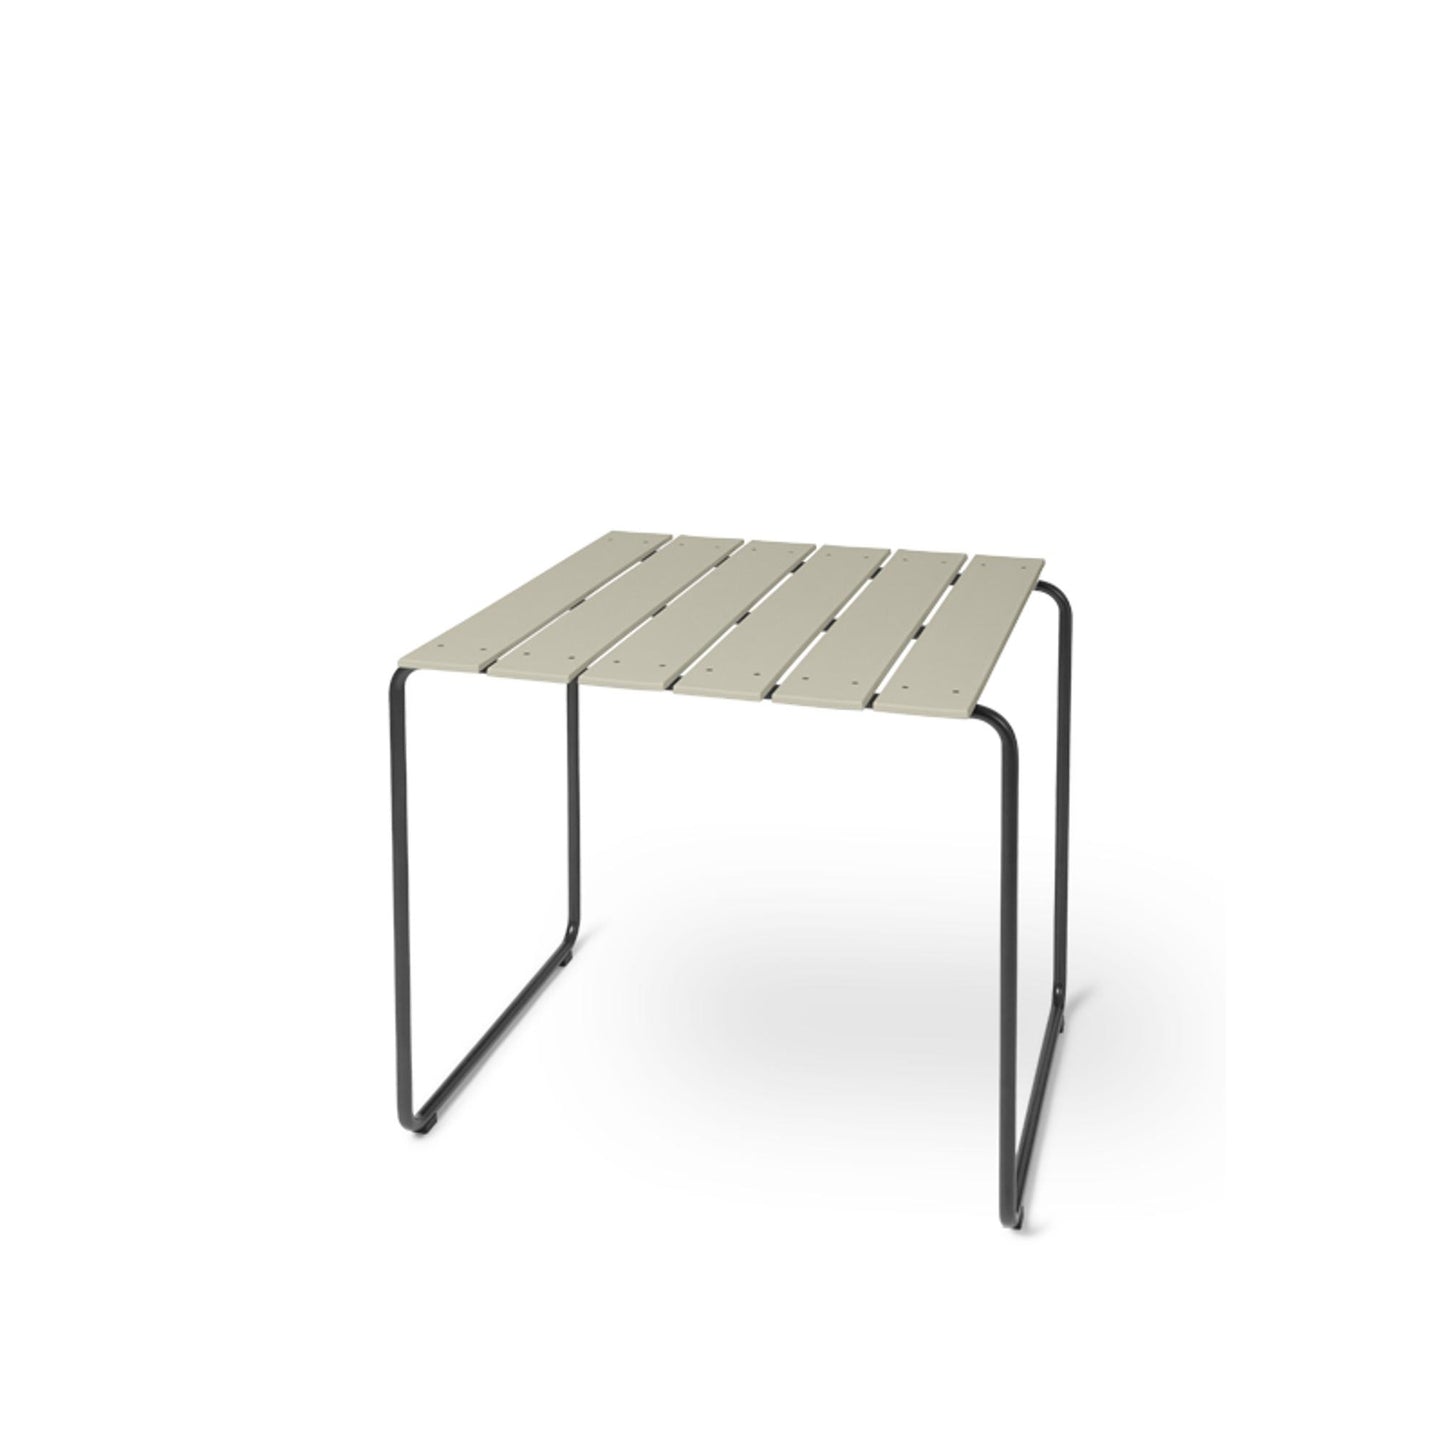 Ocean OC2 Table 70x70 cm by Mater #Sand